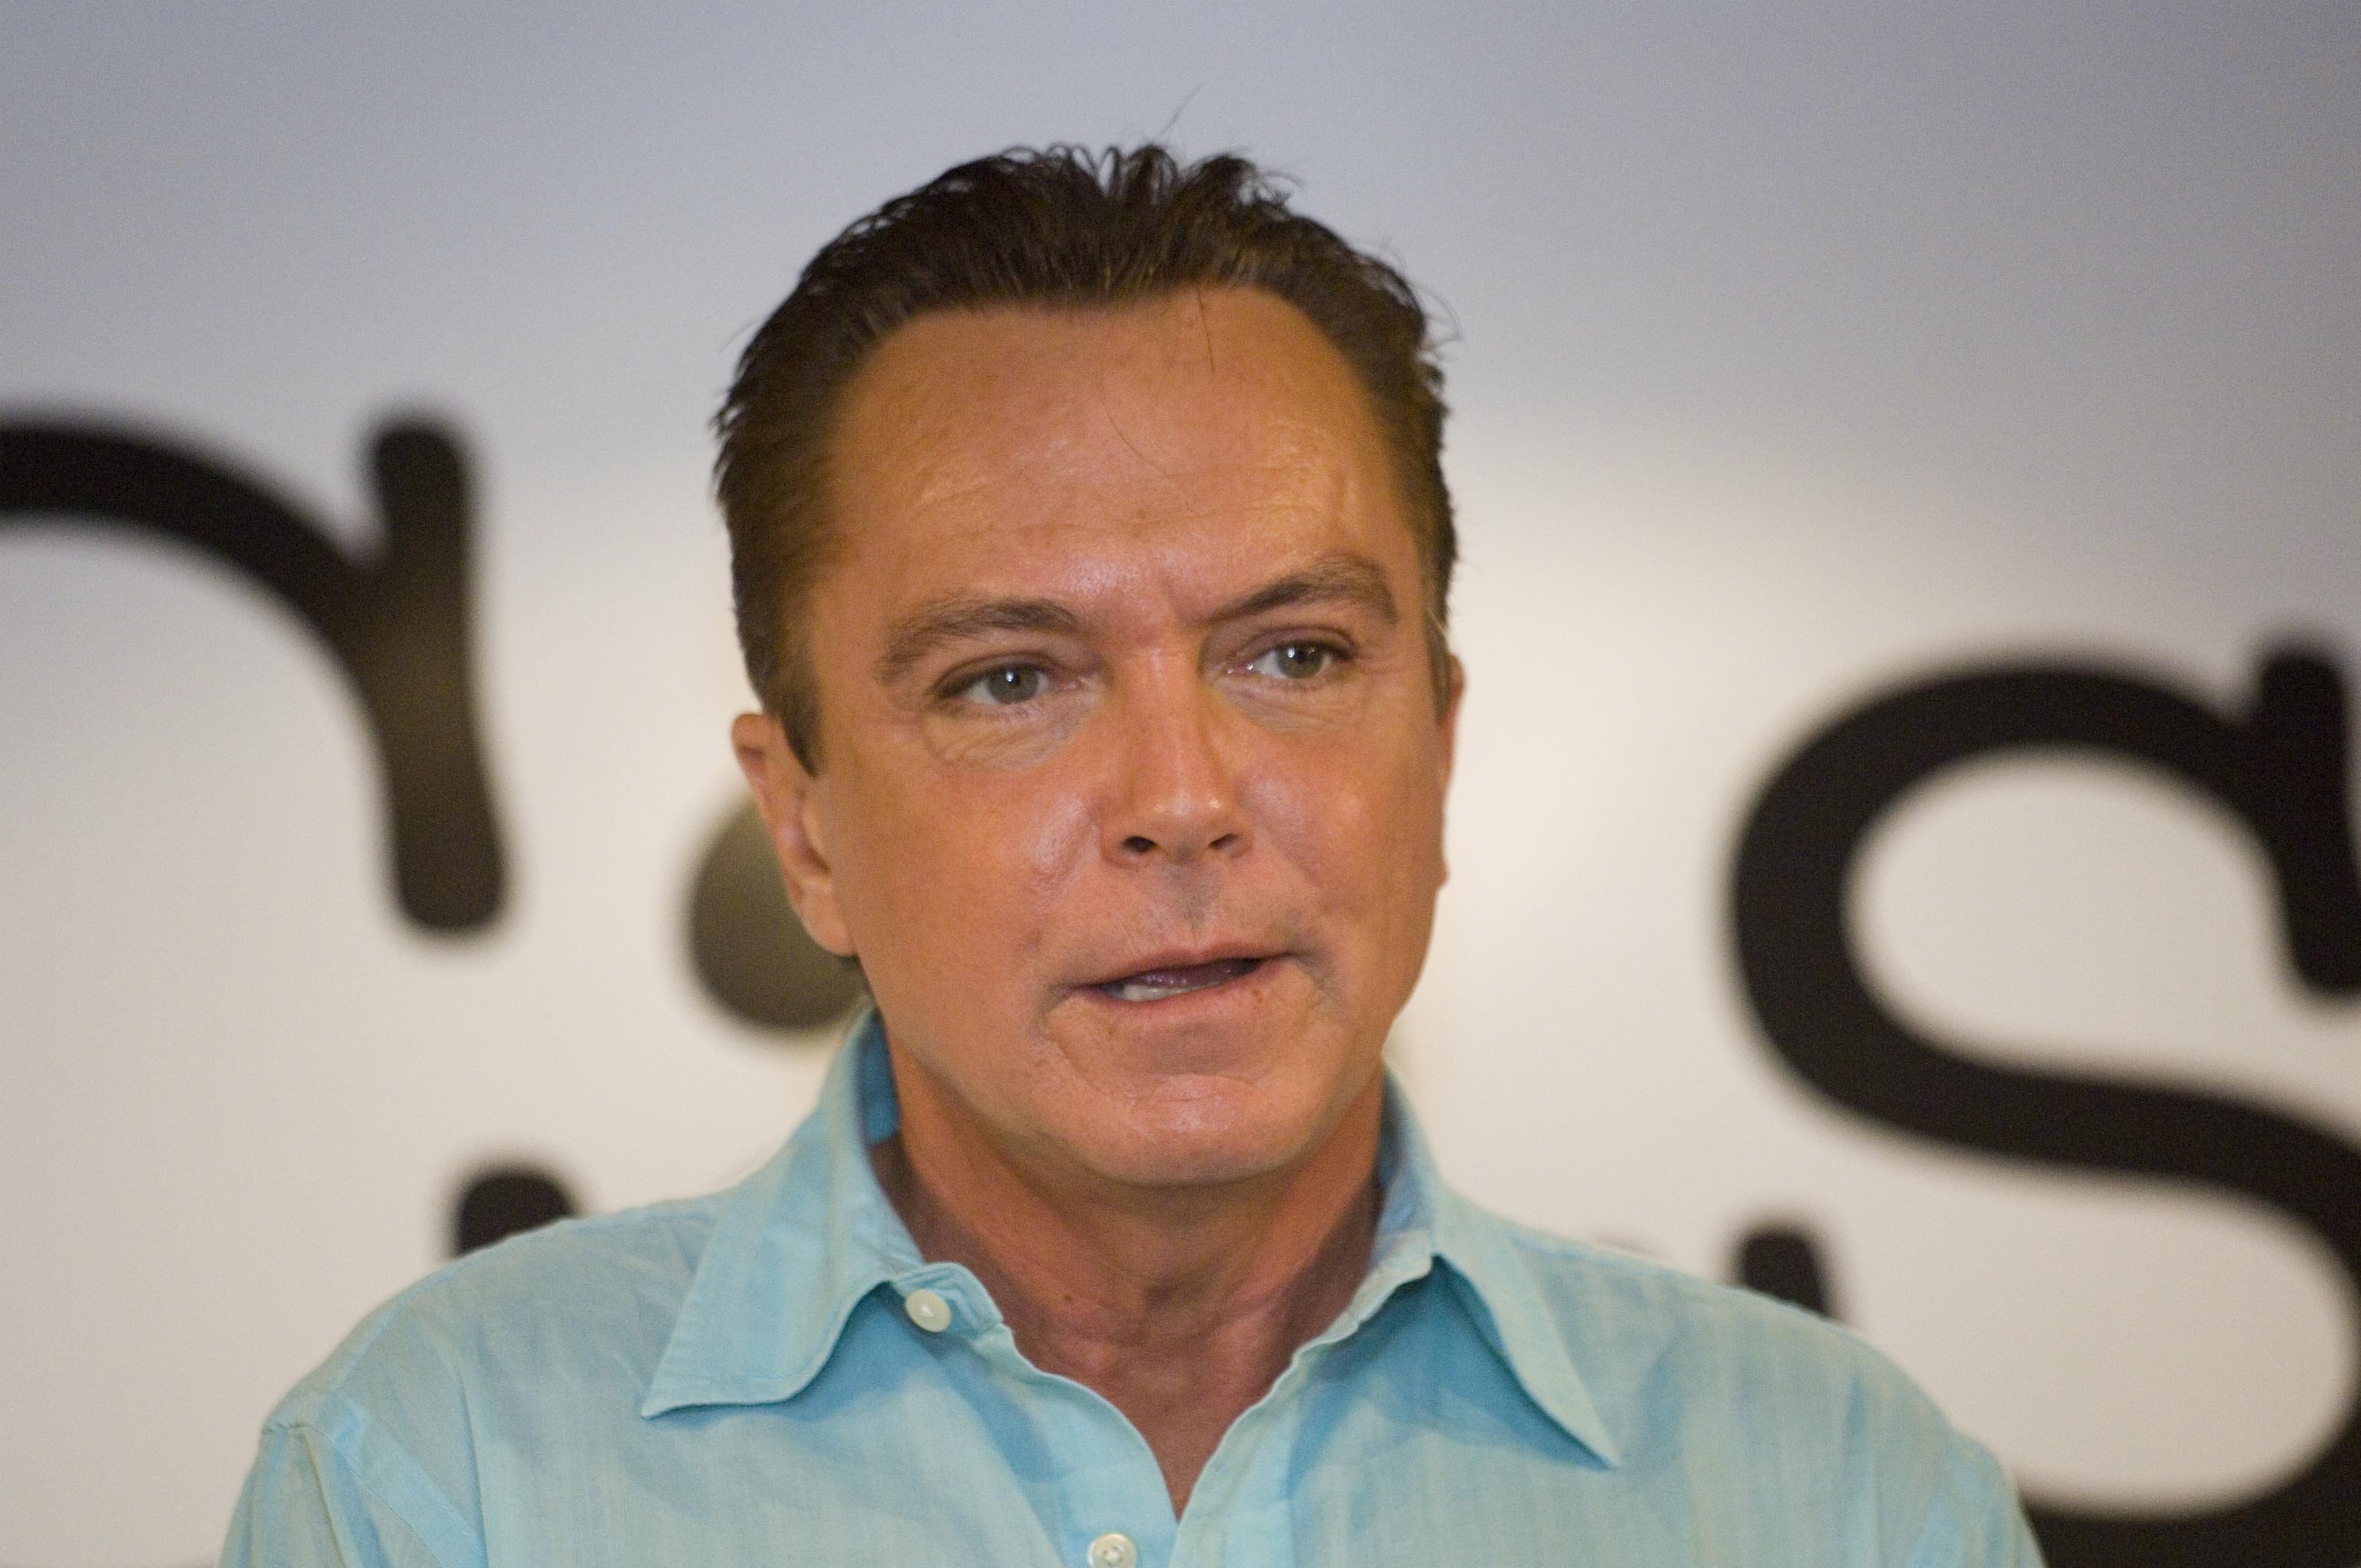 Photo of David CASSIDY at a press conference. | Source: Getty Images